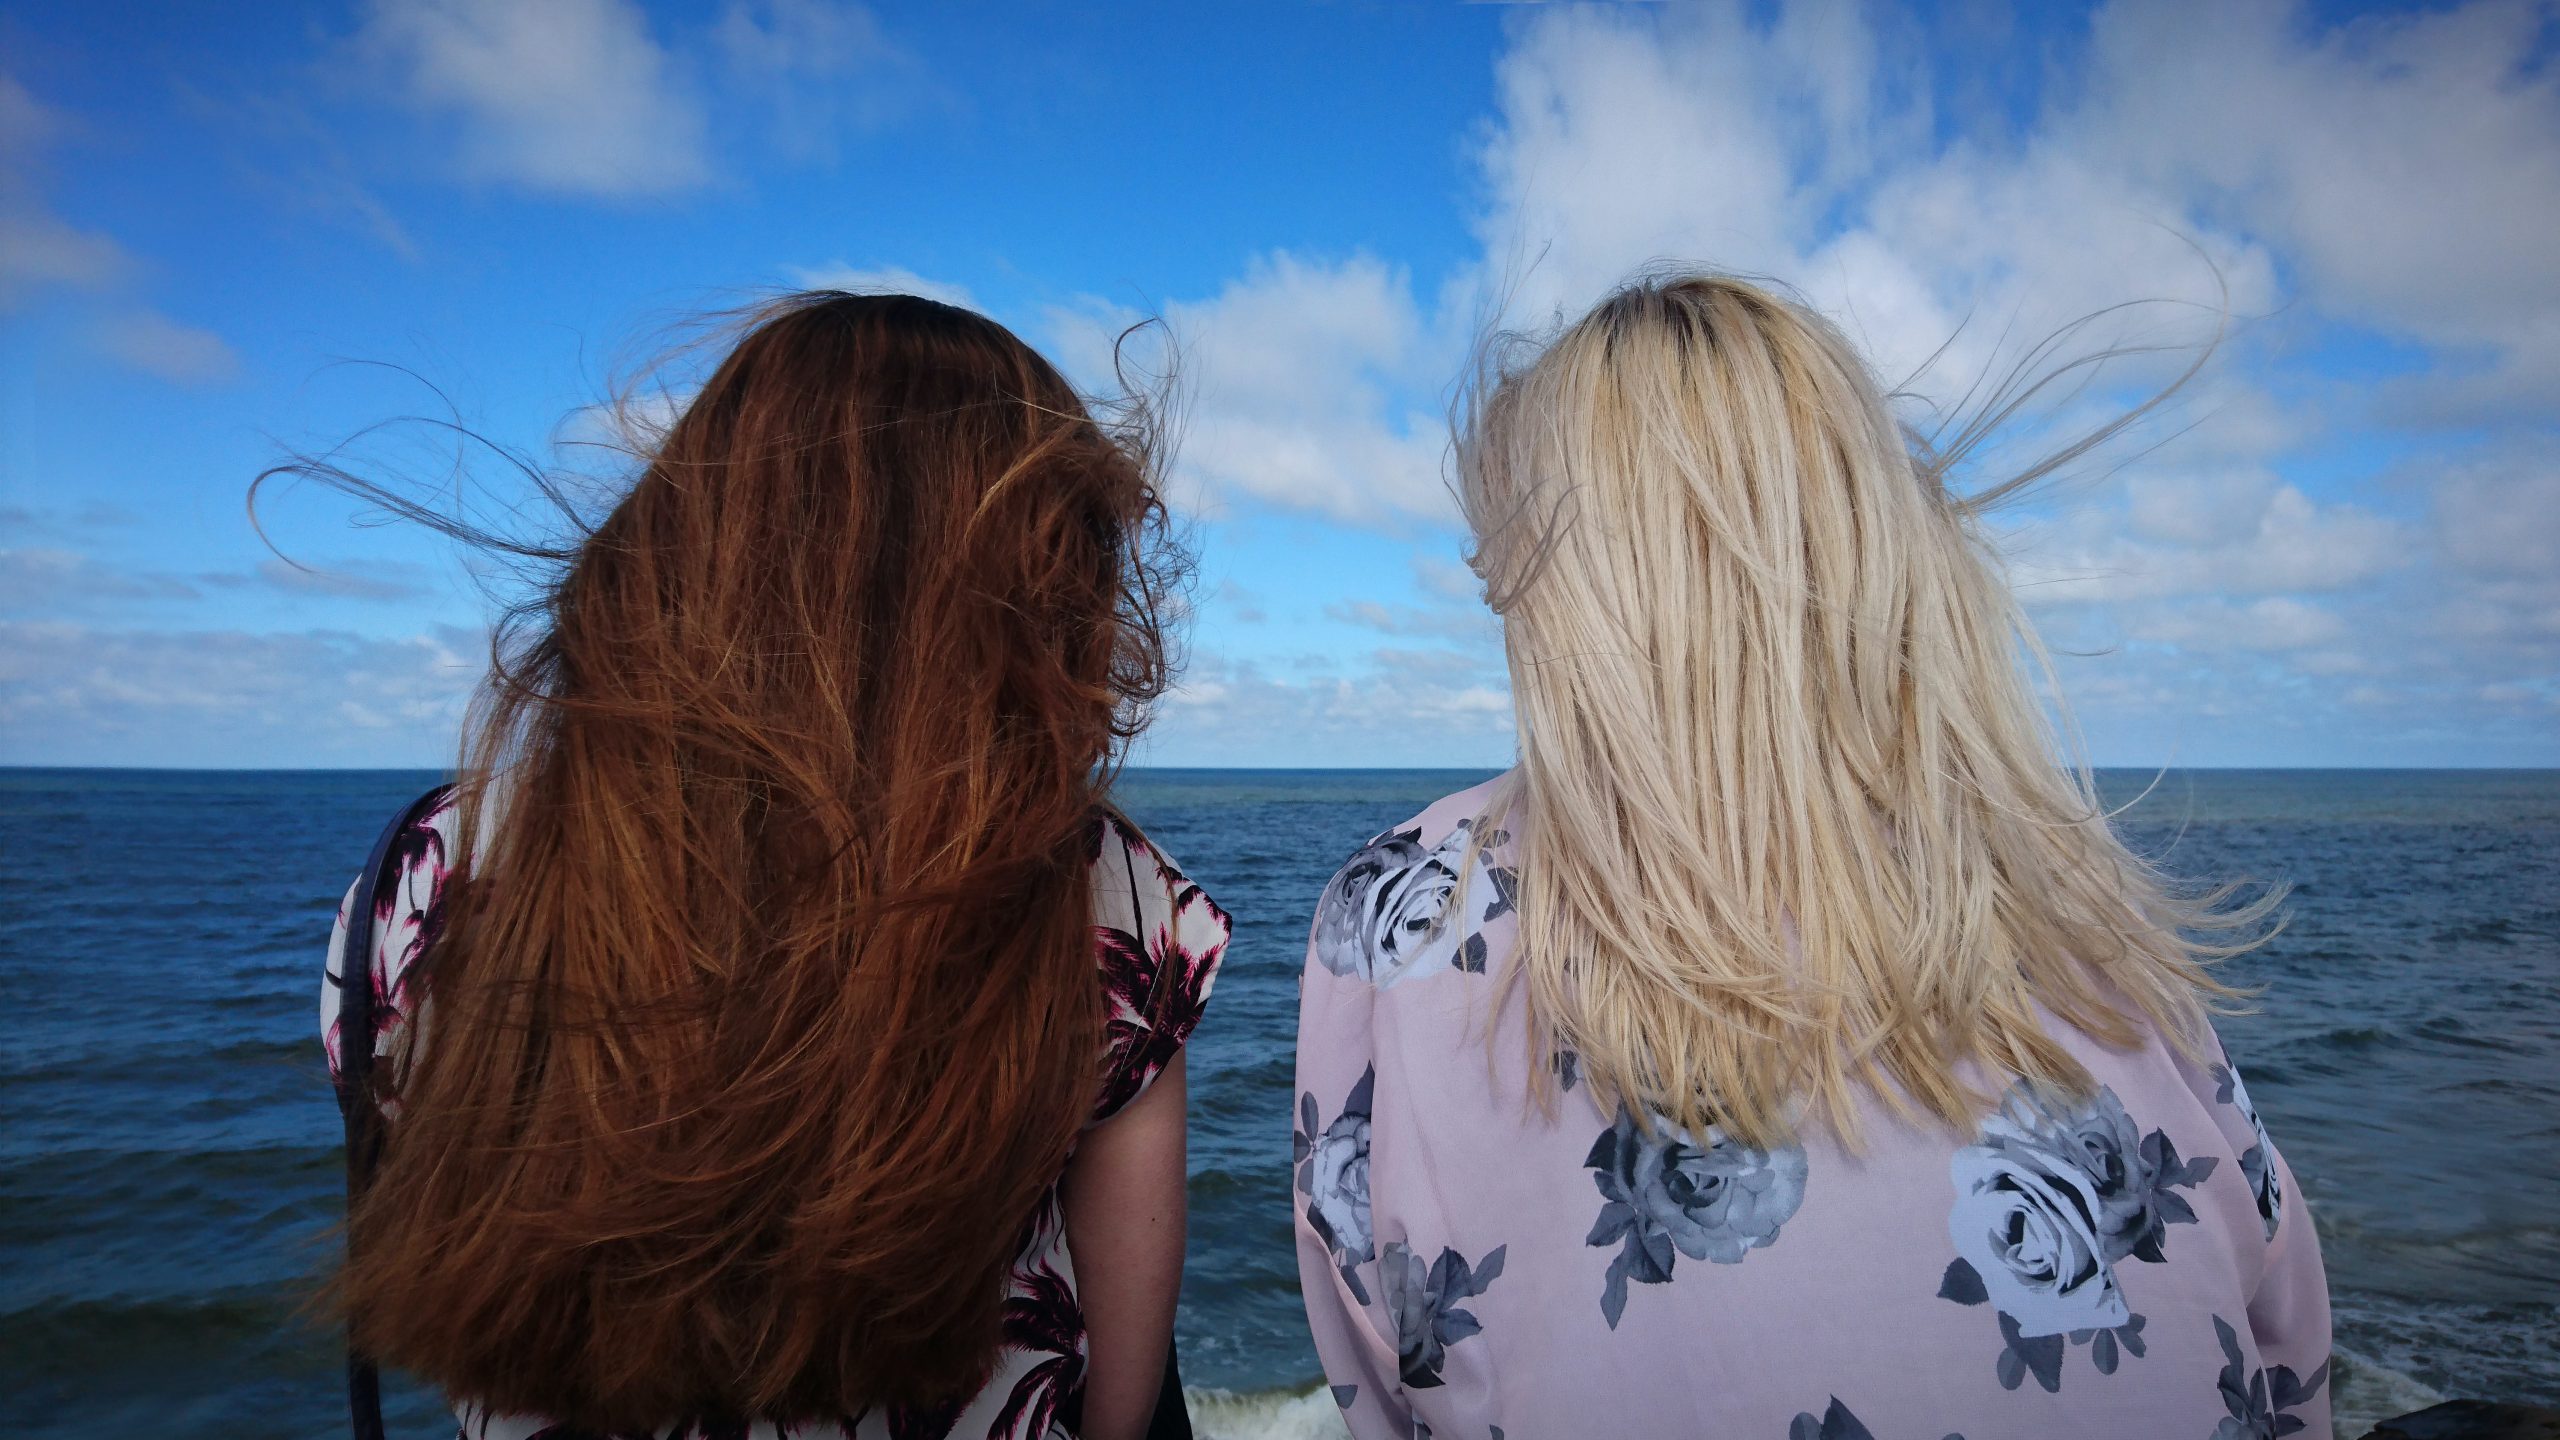 Two women sit close together and look out at the ocean.